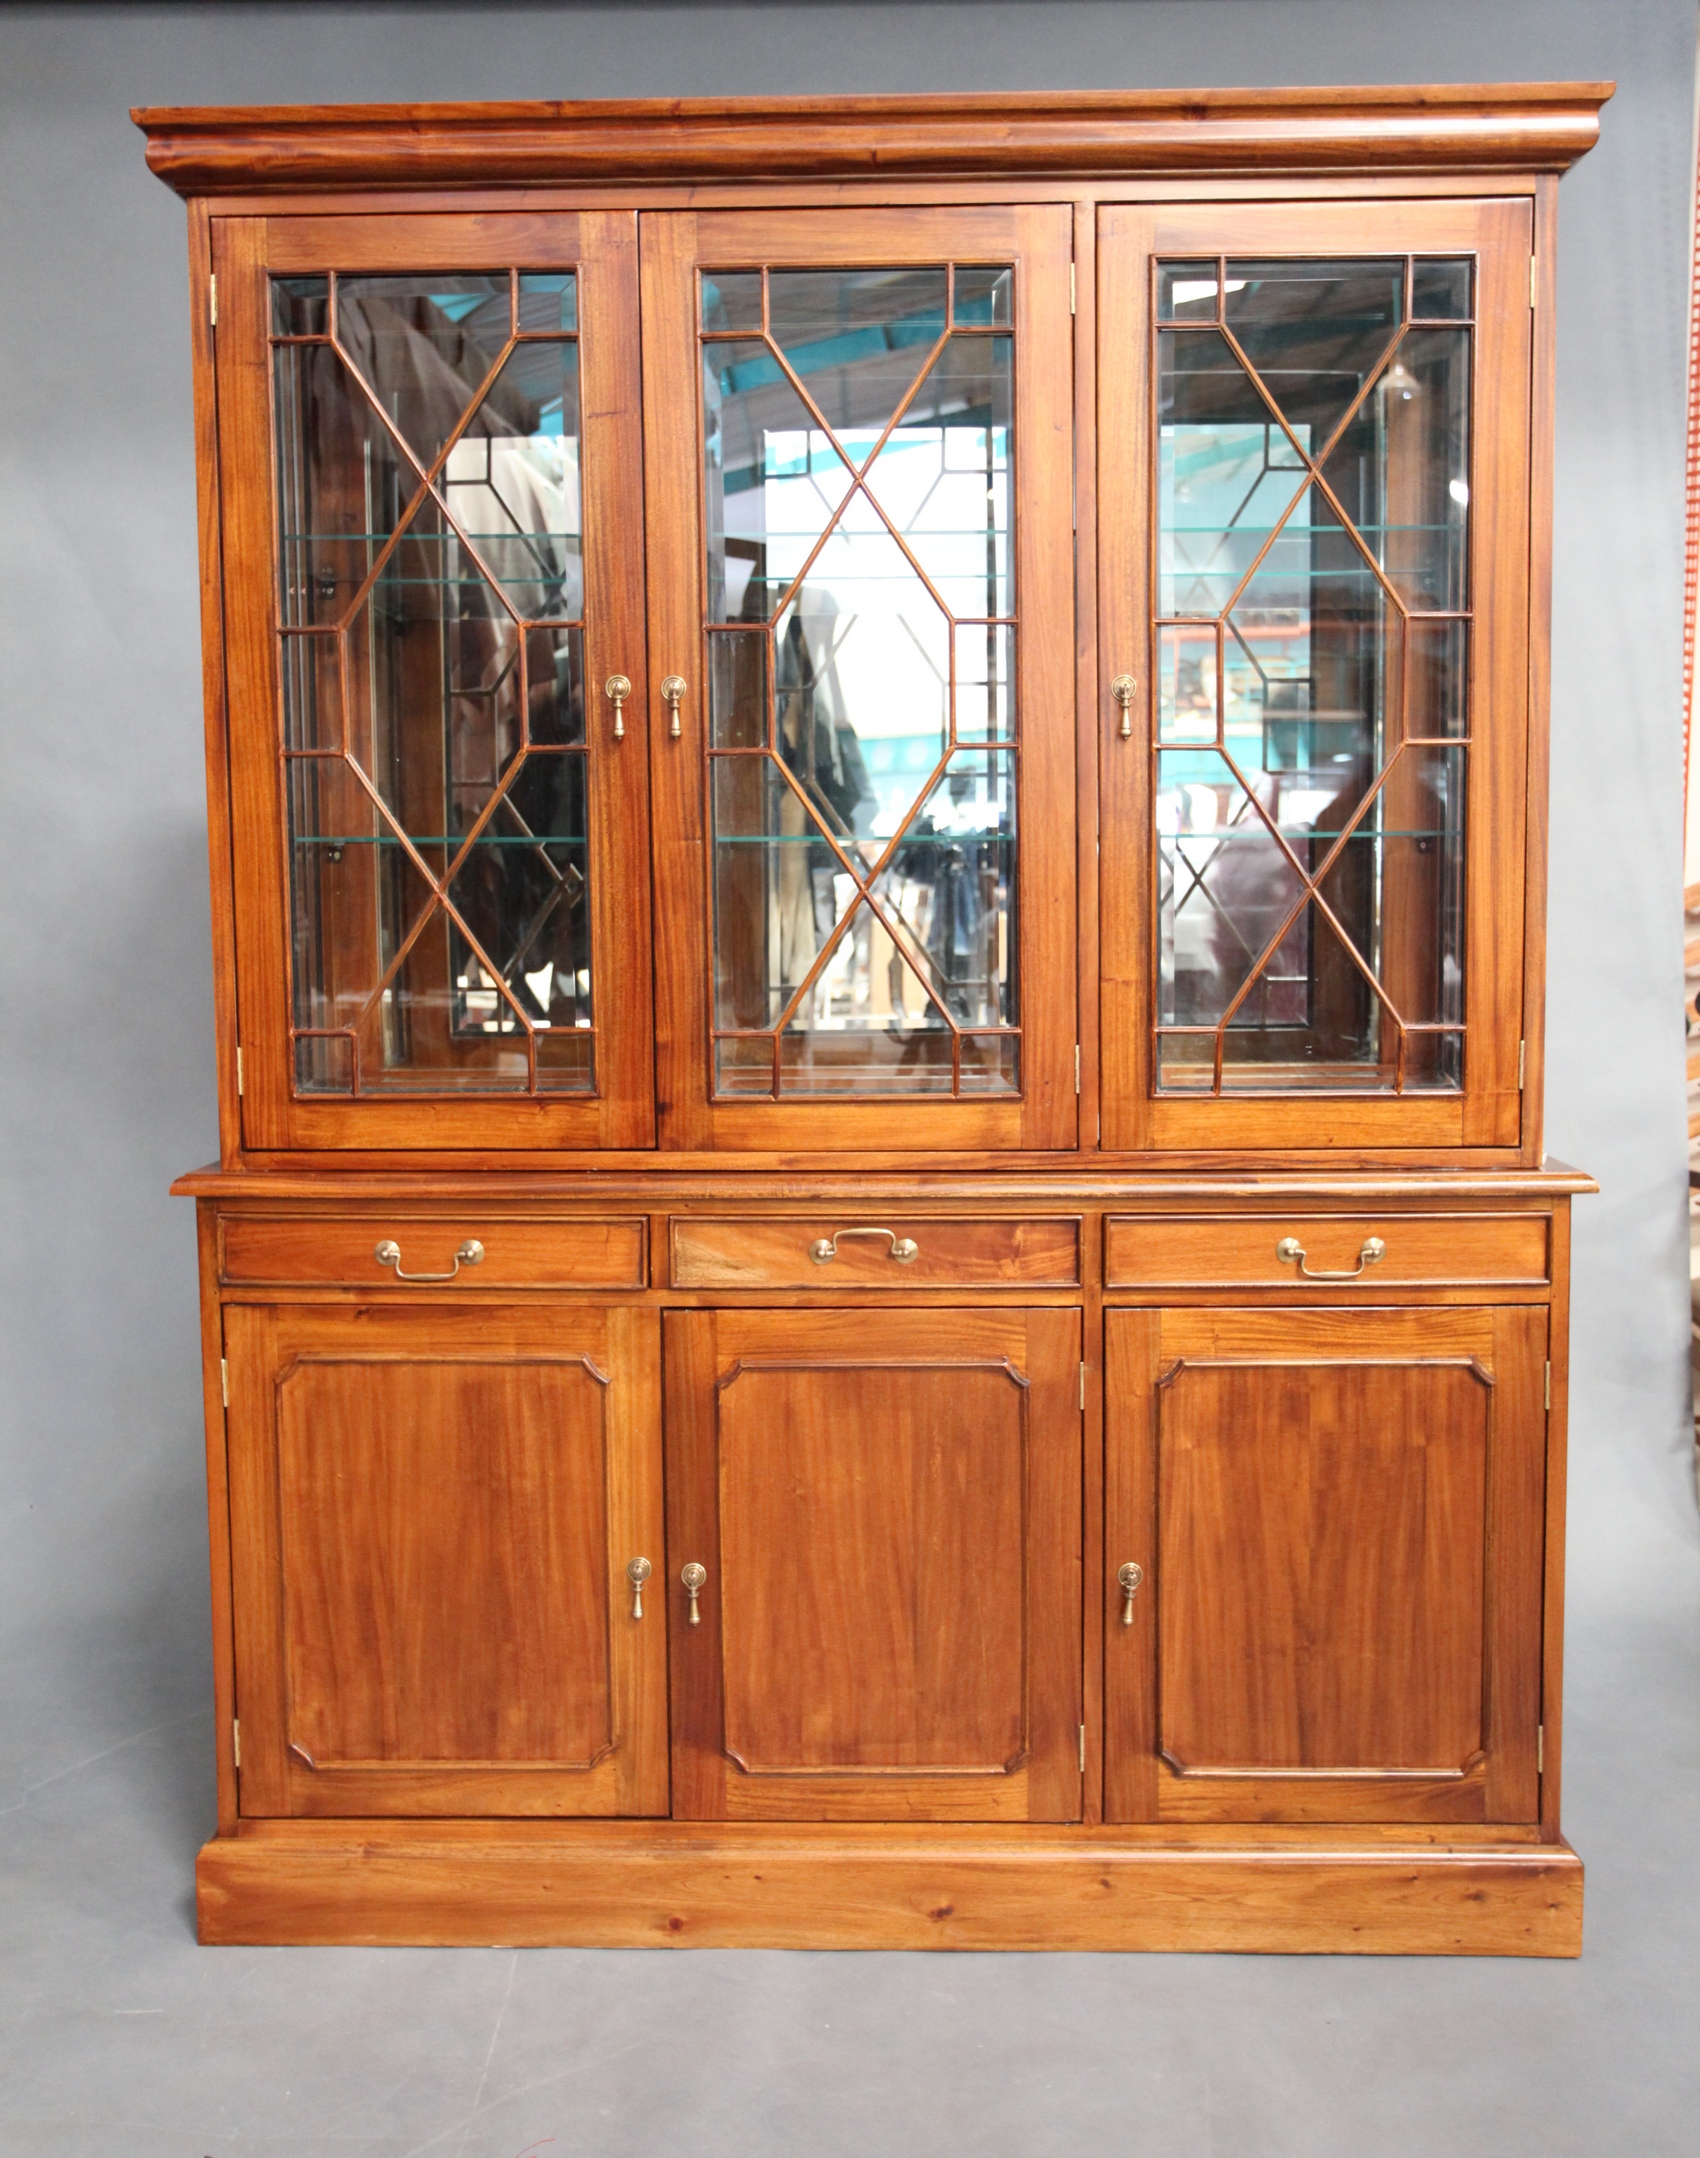 Solid Mahogany Timber 3 Doors Bookcase, Bookcase With Glass Doors Australia